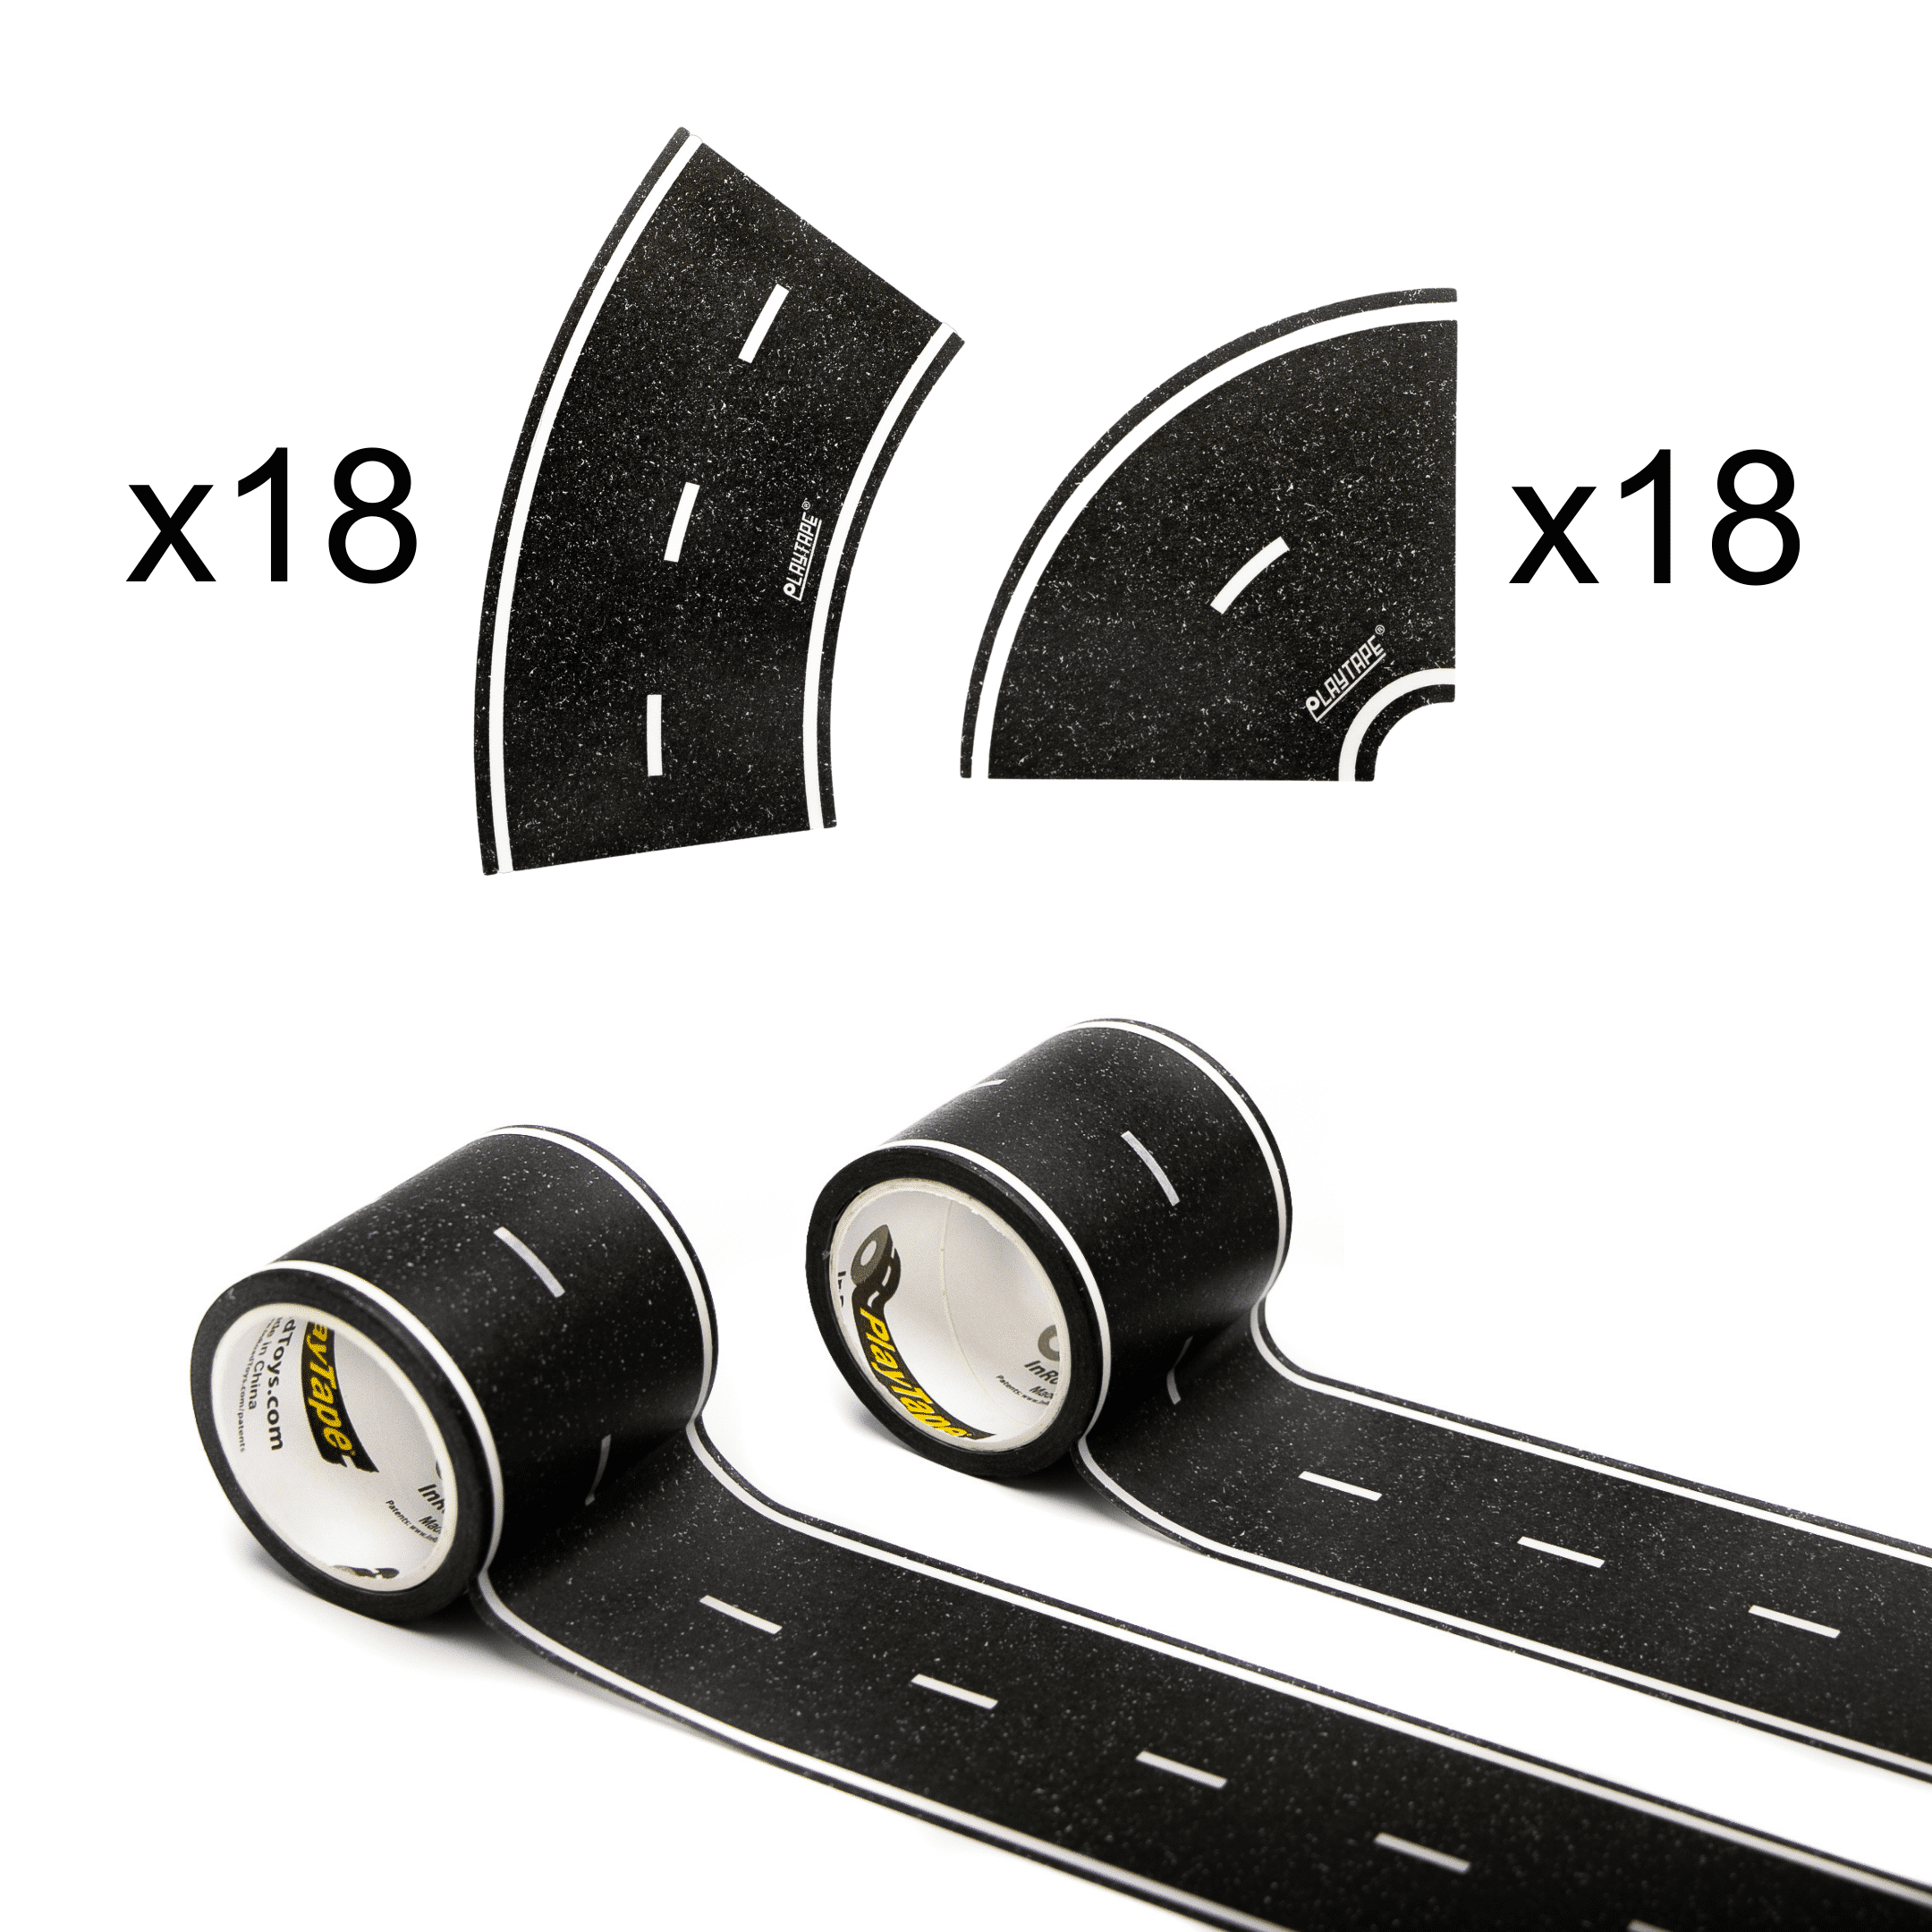 PlayTape Black Road Tape Build Pack - 30 ft. x 2 in. Black Road Tape with  36 Curve Stickers for Kid's Toy Cars and Vehicles (2 Rolls of Road Tape, 1